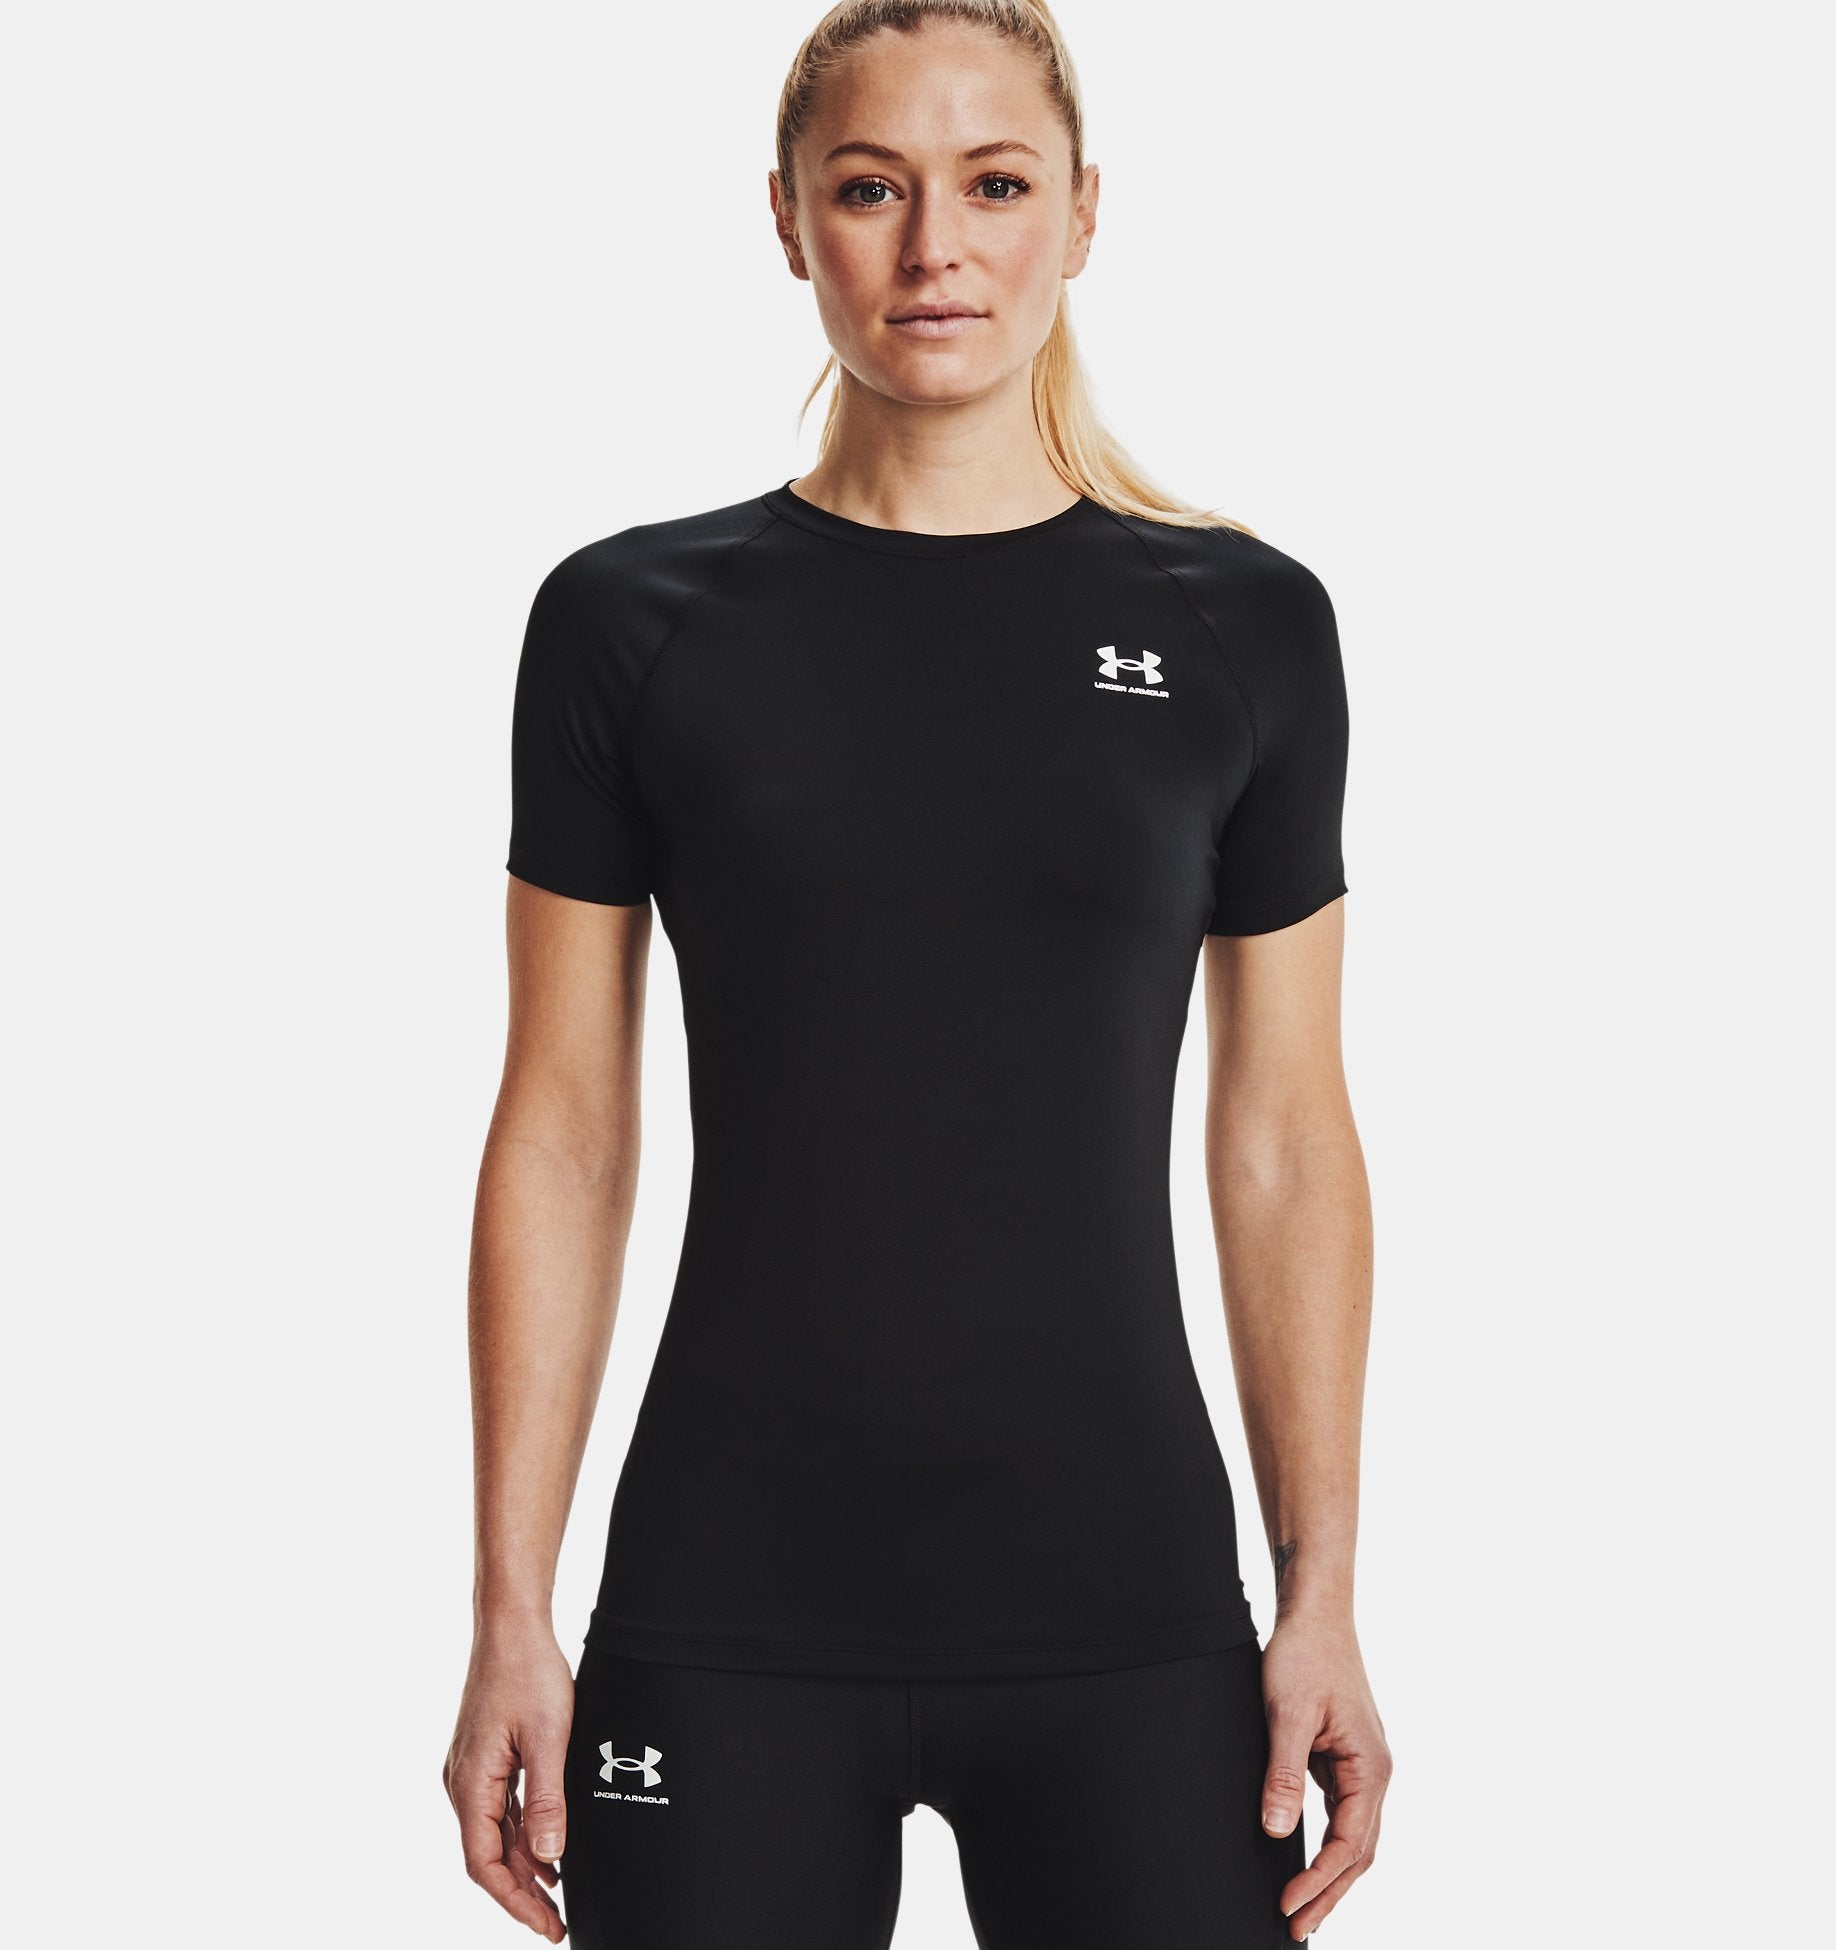 Under Armour Women's HeatGear High Waisted Pocketed Capri : :  Clothing, Shoes & Accessories